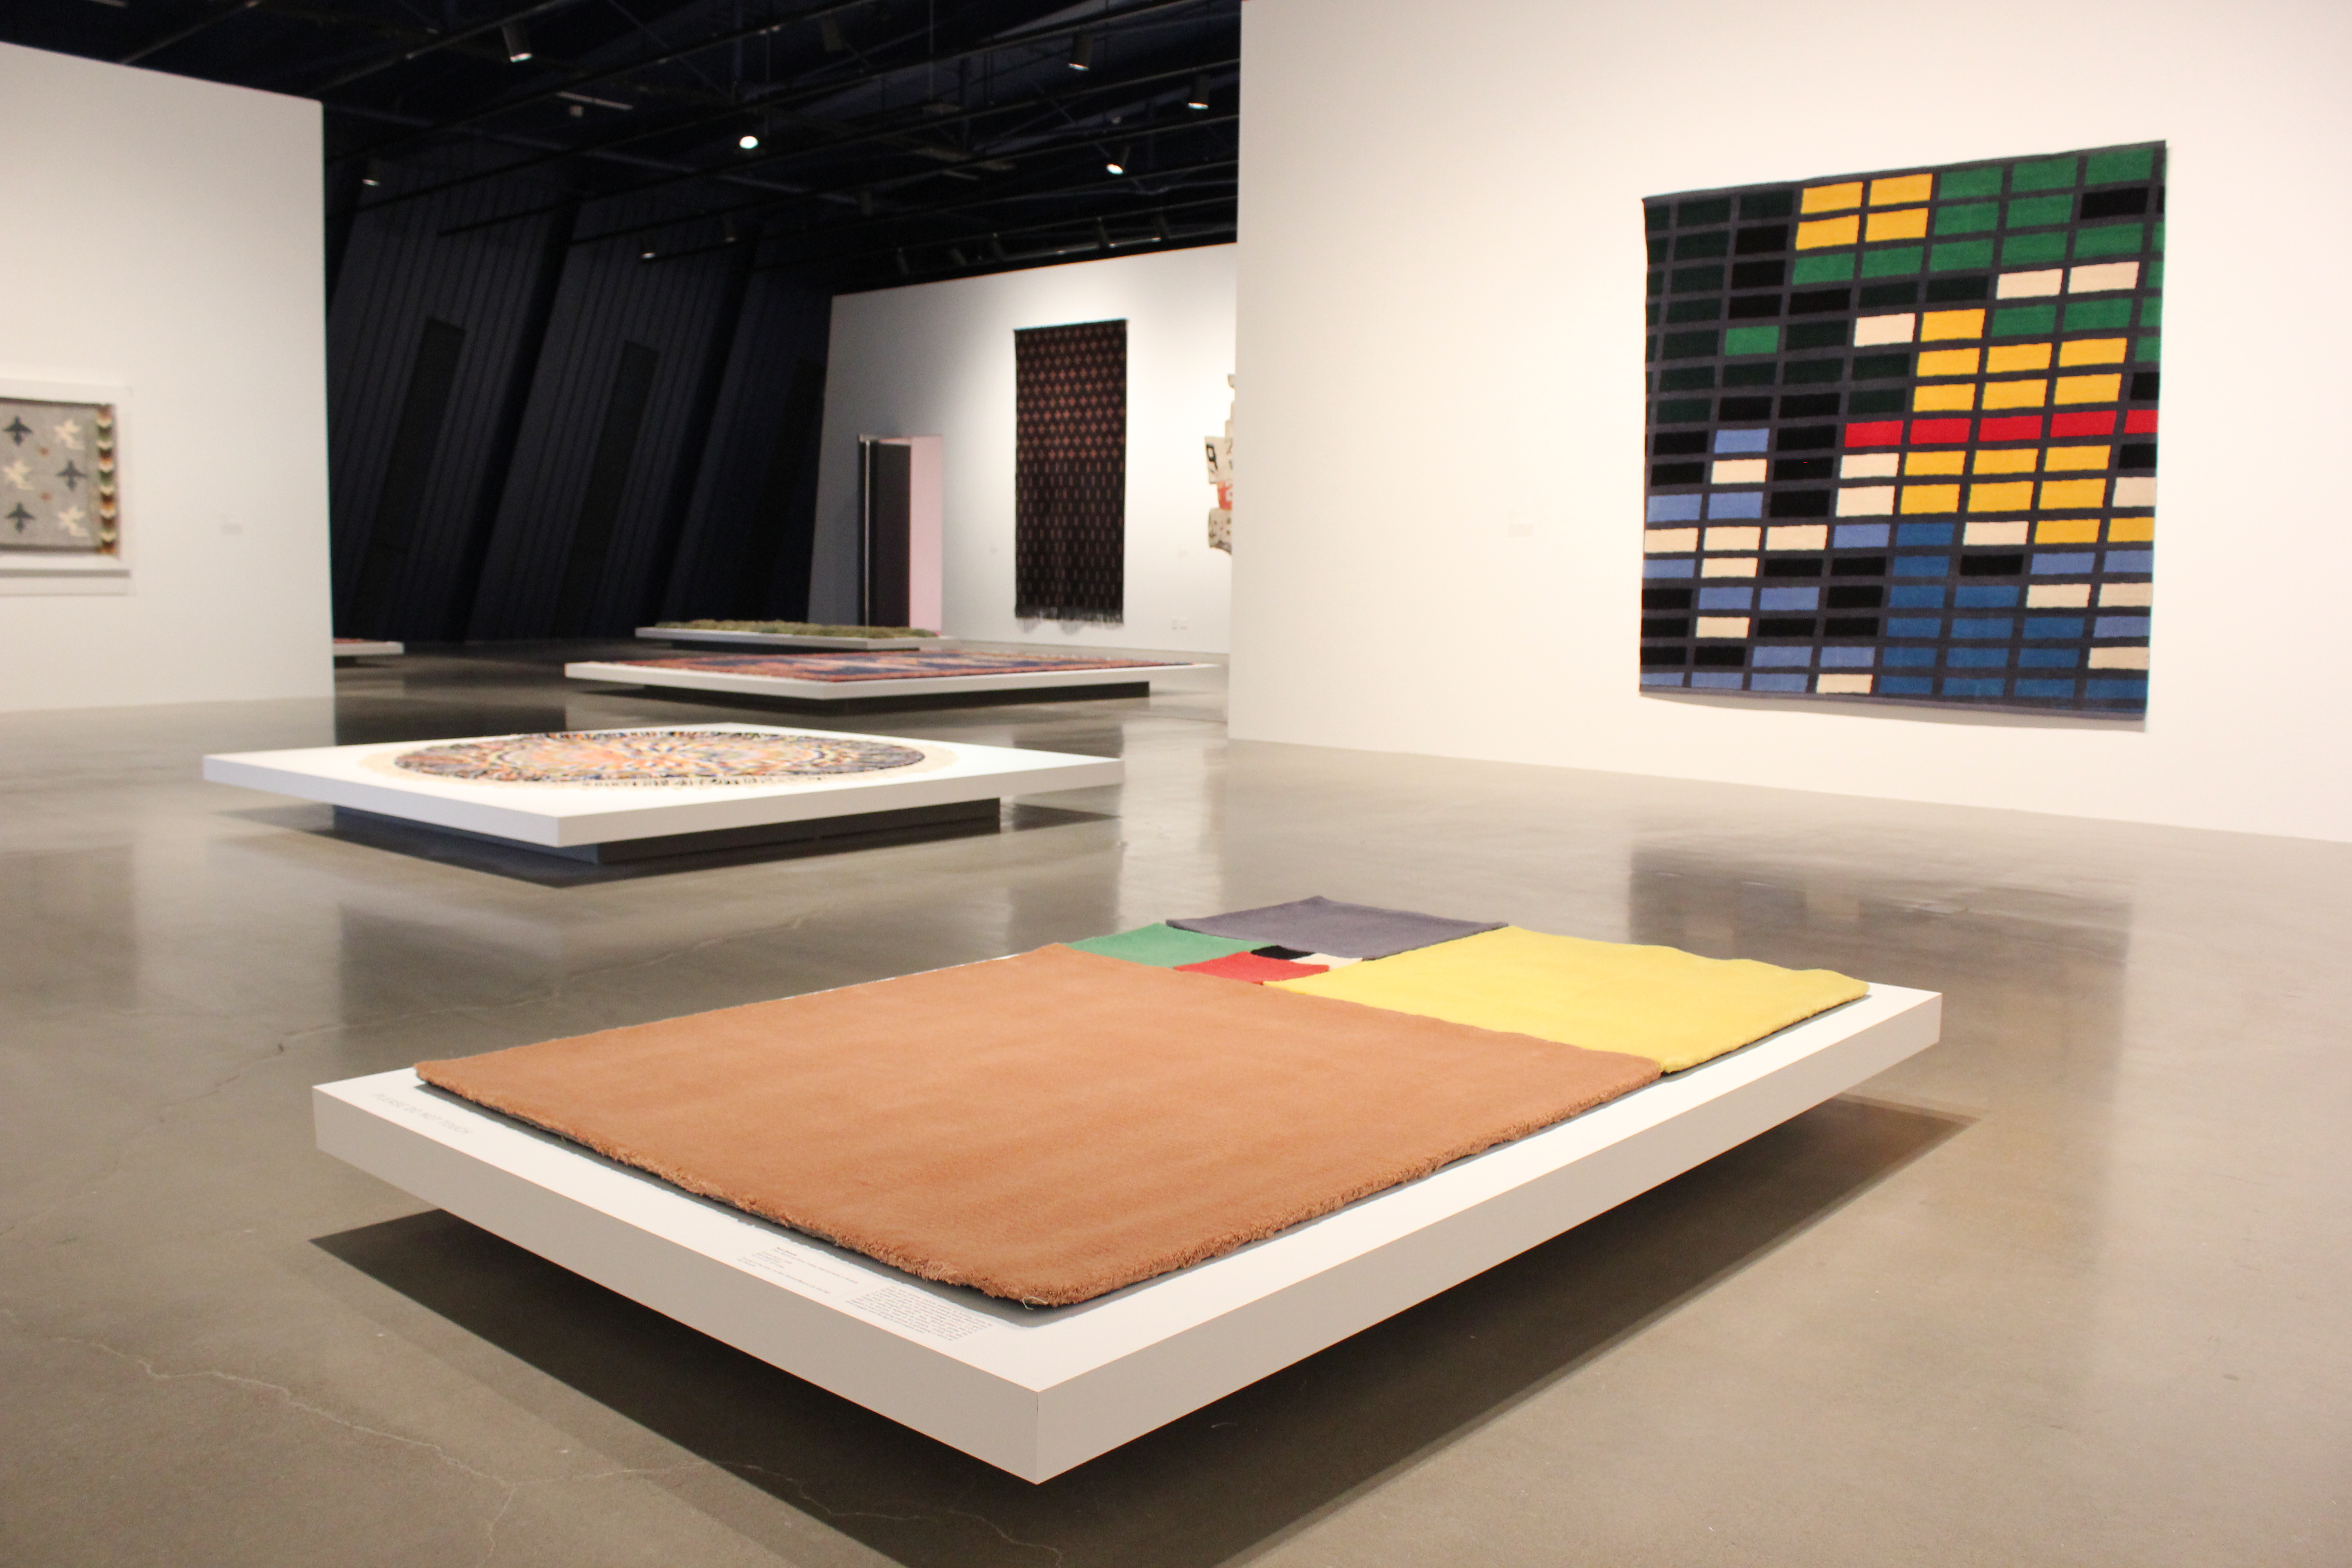 In the foreground, “Infinite Carpet” by Pierre Bismuth, a nod to mathematics’ Fibonacci series, is one of many carpets featured in MOCA Cleveland’s fall exhibition, “Wall to Wall: Carpets by Artists.”